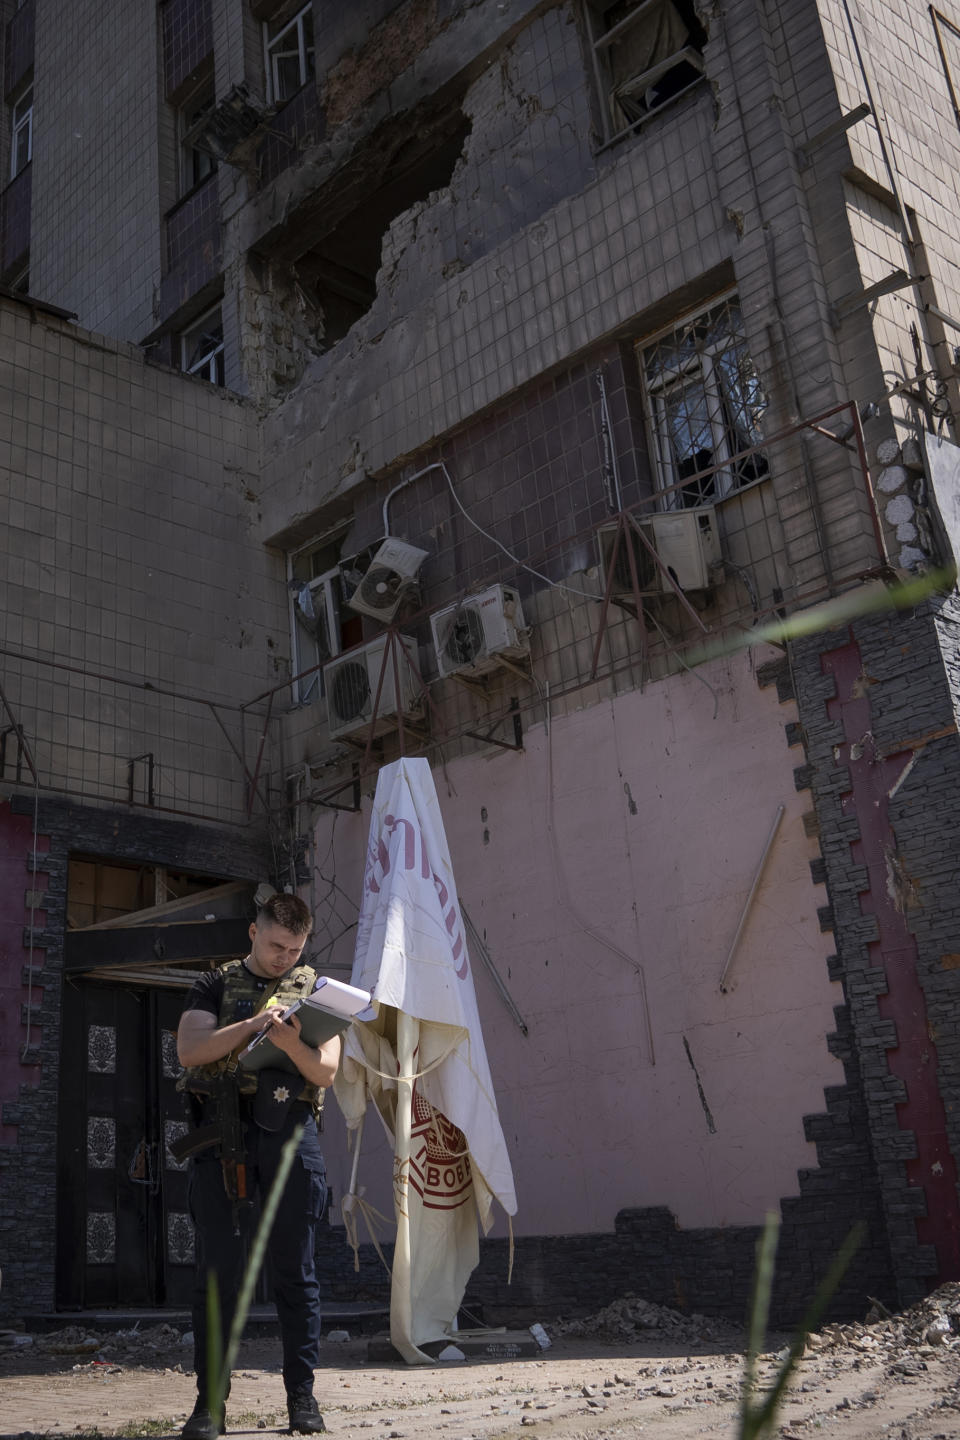 Police inspect an apartment building damaged by a drone during a night attack in Kyiv, Ukraine, Sunday, May 28, 2023. Ukraine's capital was subjected to the largest drone attack since the start of Russia's war, local officials said, as Kyiv prepared to mark the anniversary of its founding on Sunday. (AP Photo/Vasilisa Stepanenko)